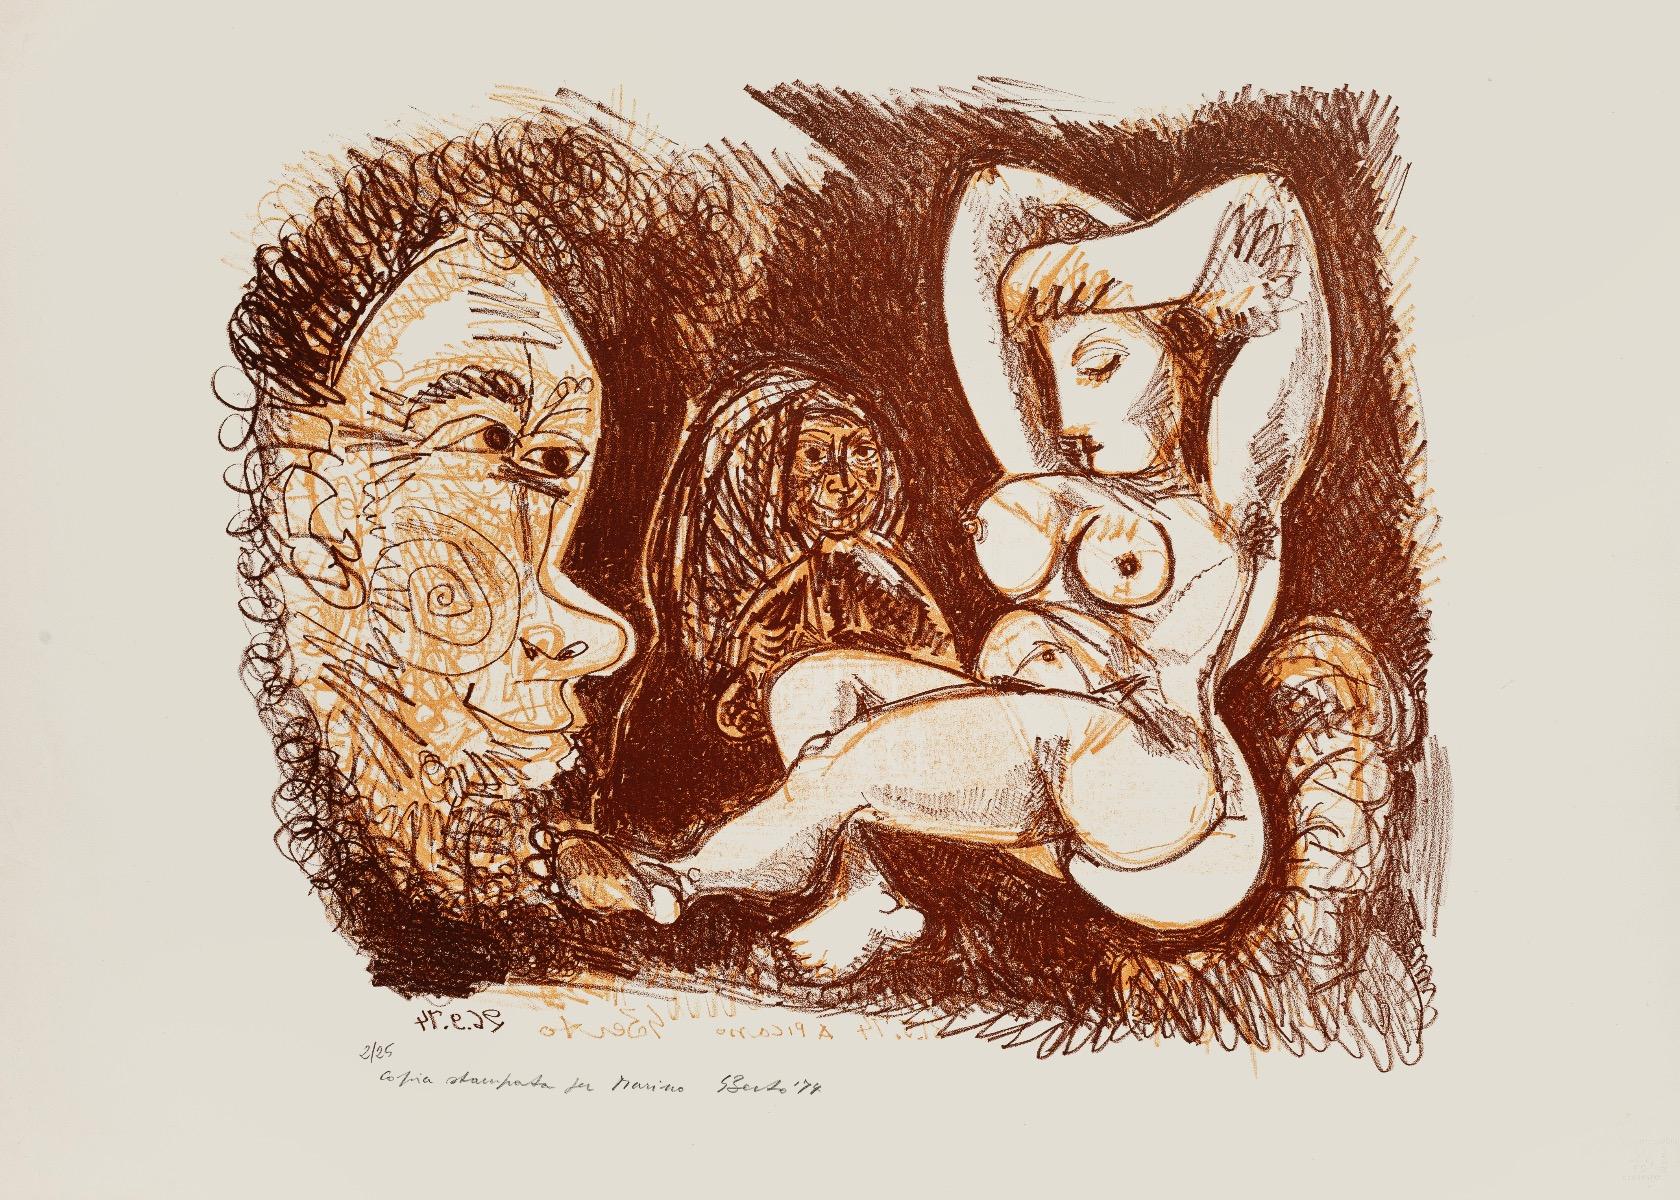 Homage to Picasso is an original lithograph realized by Gian Paolo Berto, in 1974.

Good conditions.

Hand-signed in pencil on the lower left, dated, and numbered edition 2/25.

The artwork represents a nude figure through strong strokes the artwork